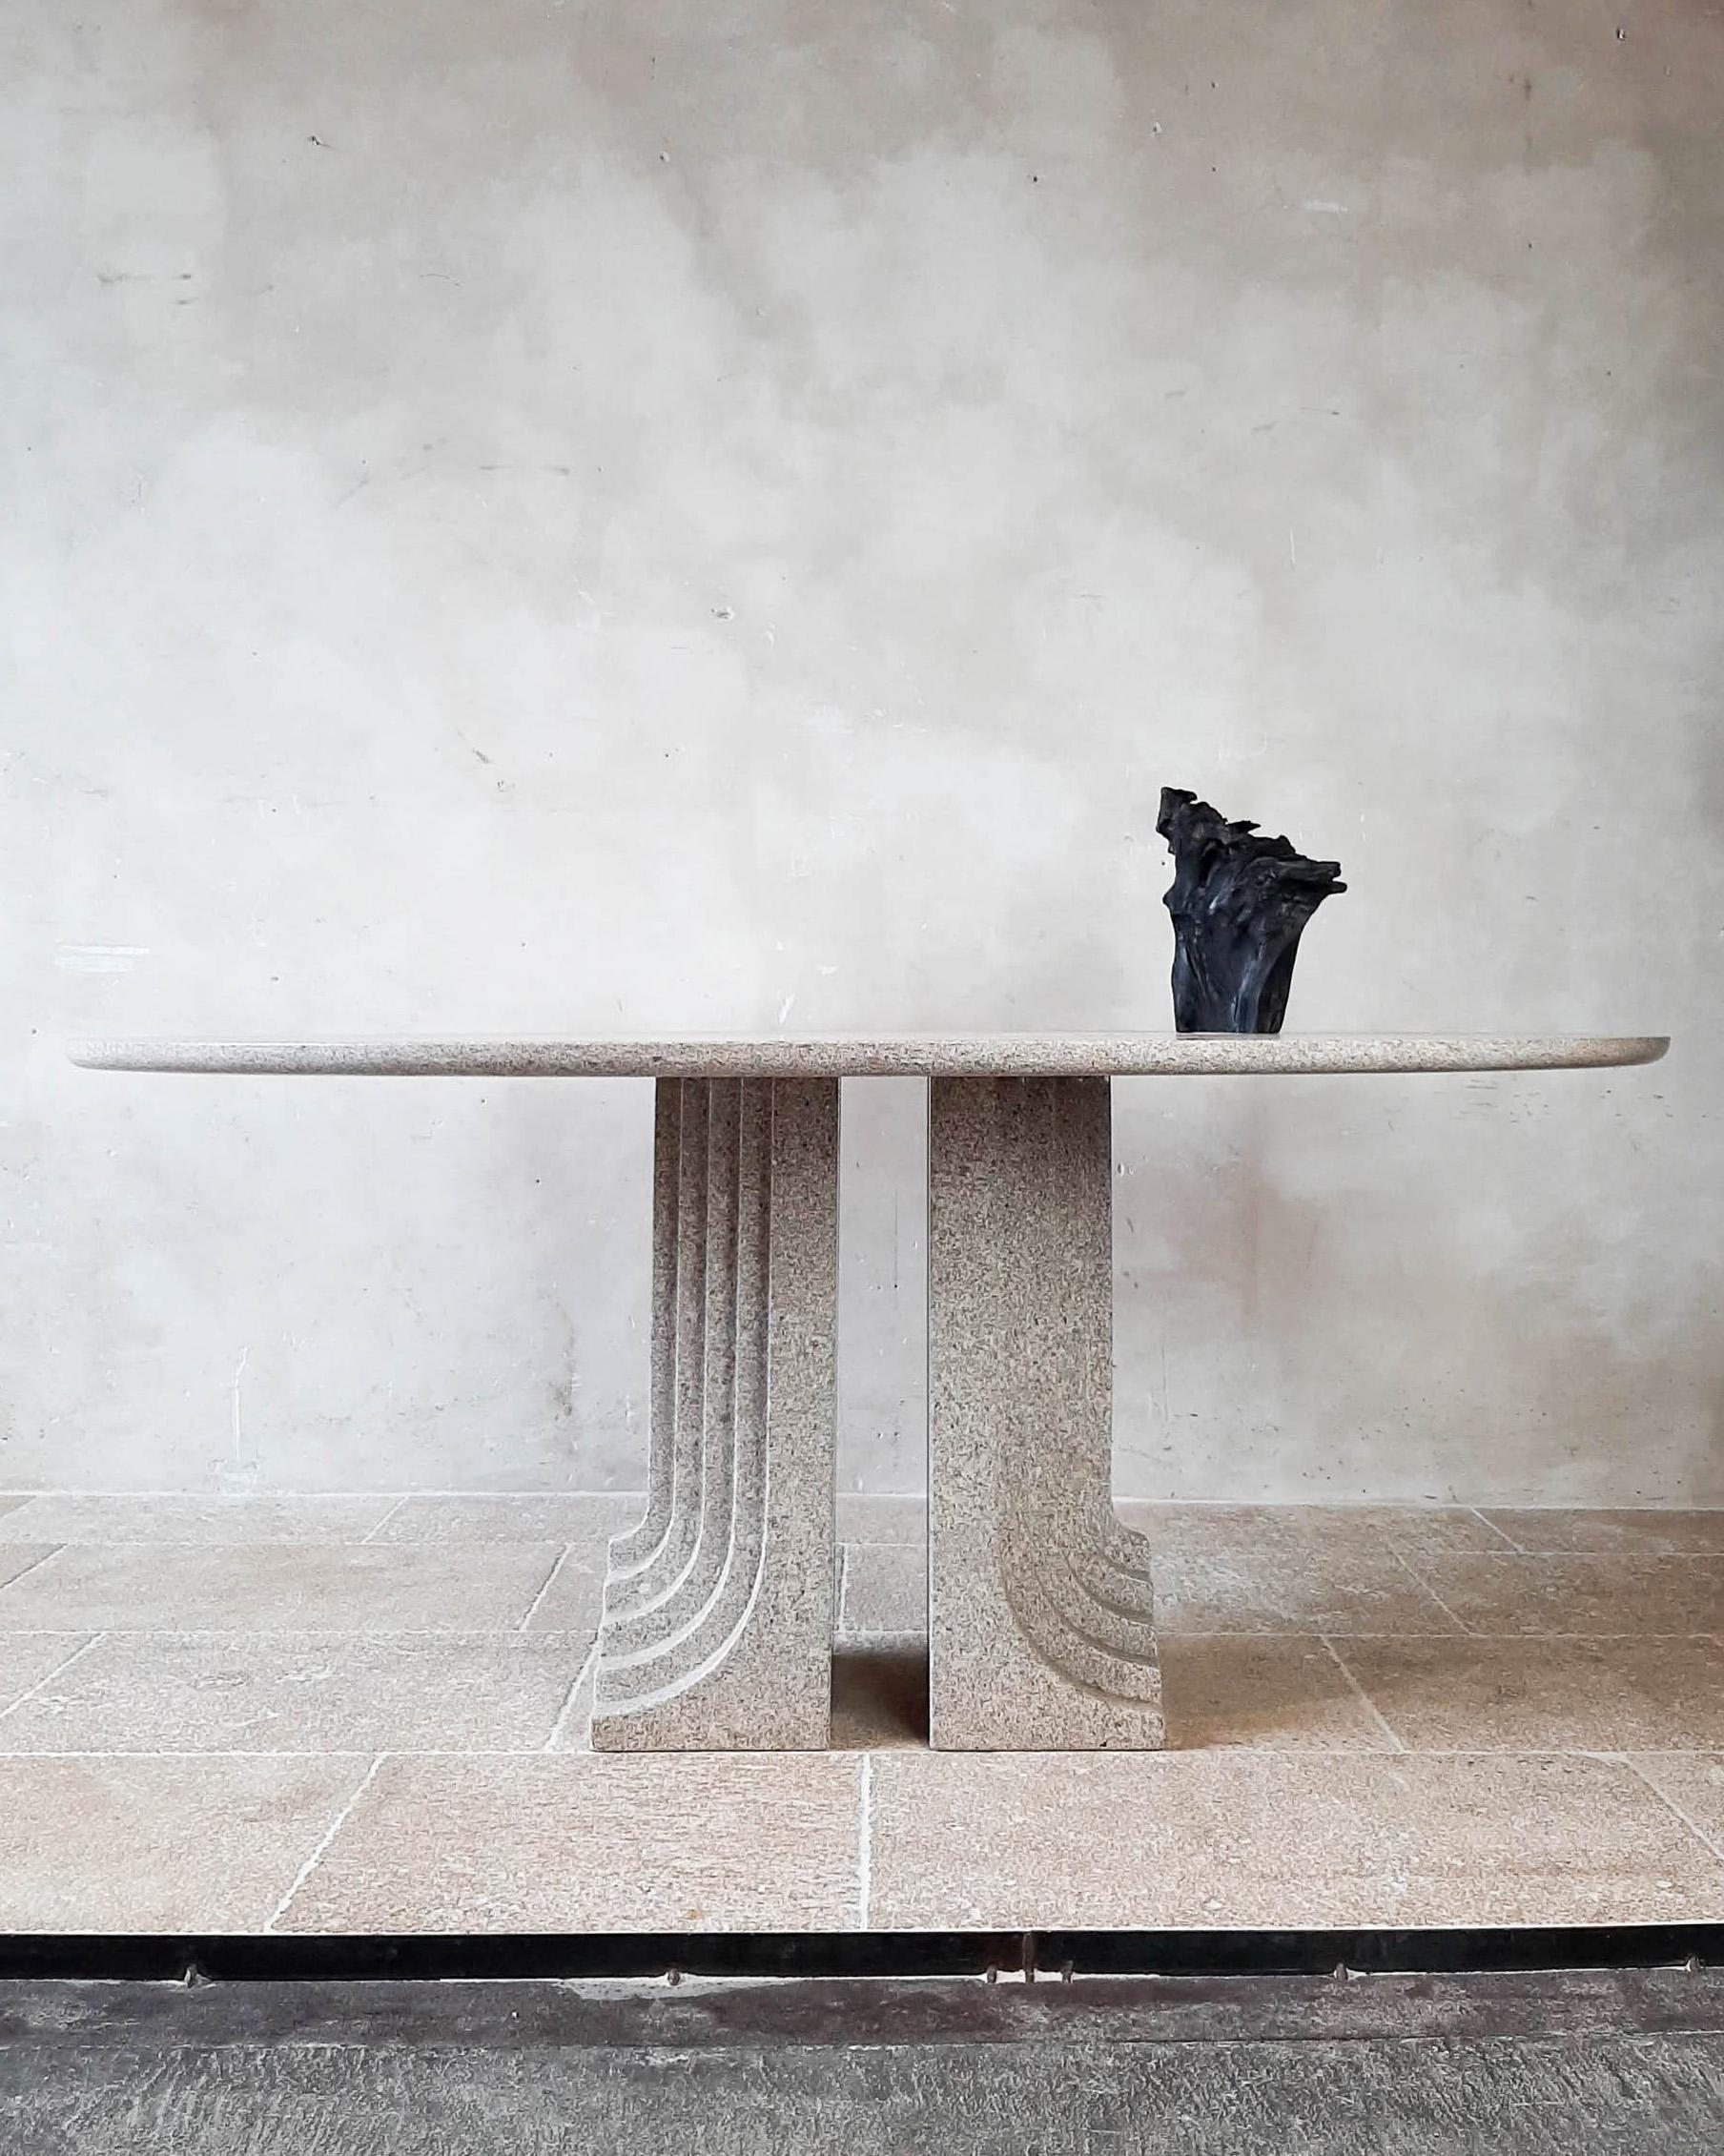 Vintage oval dining table designed model Samo, by Carlo Scarpa and Manufactured by Simon, Italy 1970s. Light grey granite dining table with oval top on two sculptural bases.

Measures: Length 178 cm x width 125 cm x height 72 cm.